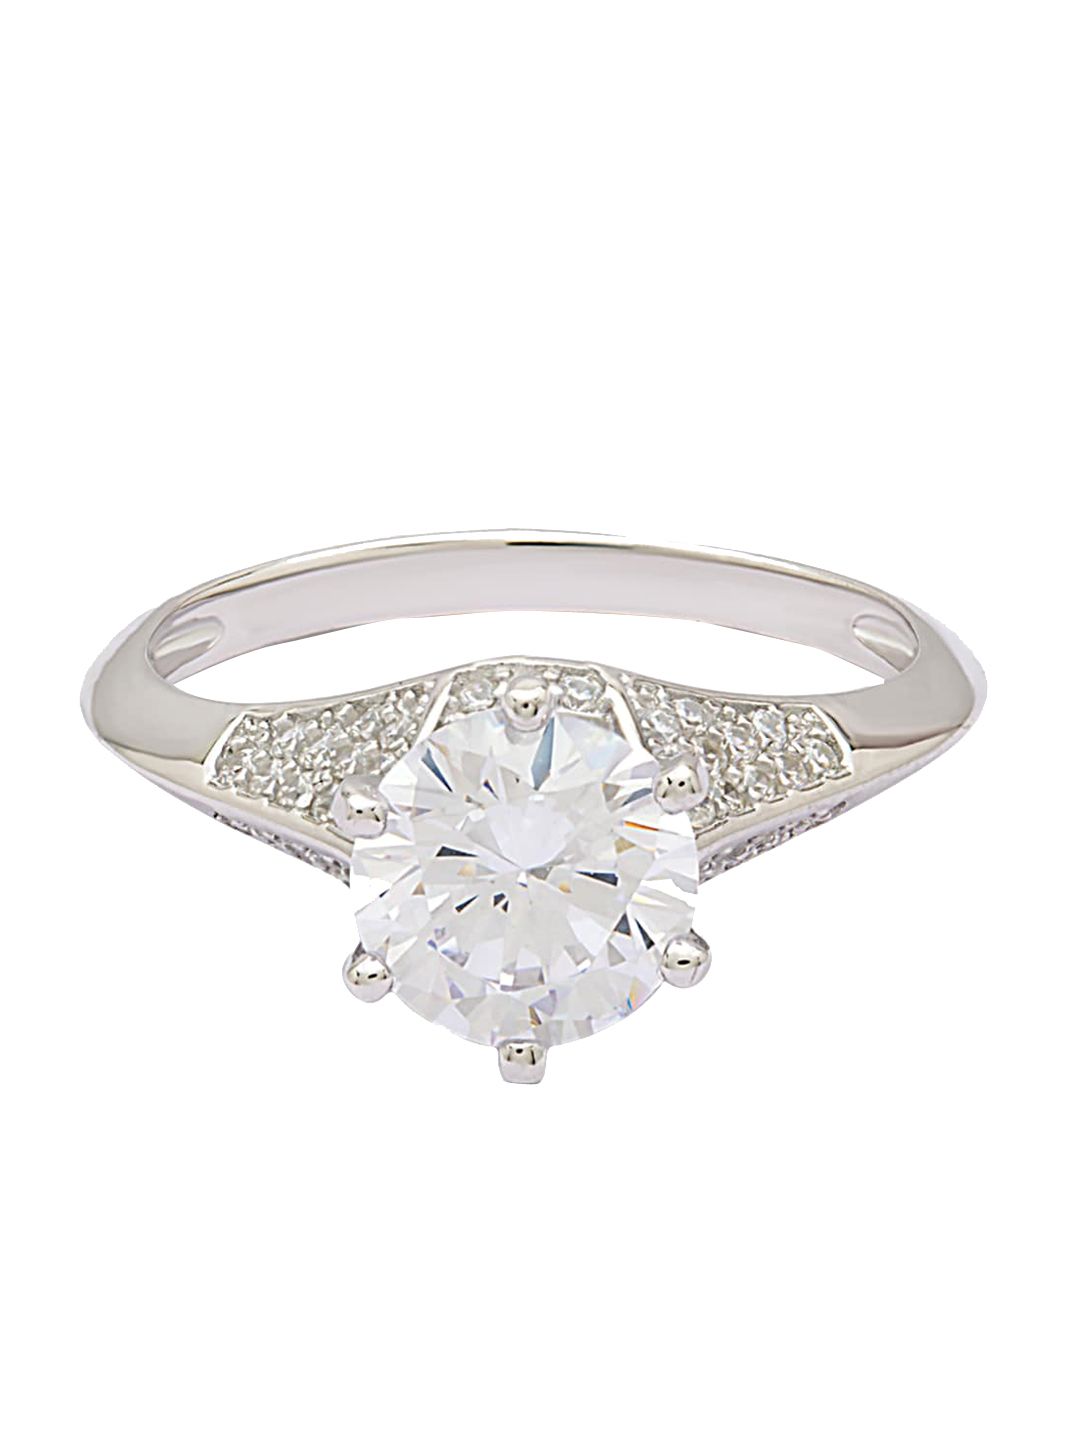 ANAYRA Silver-Toned & White CZ-Studded Finger Ring Price in India